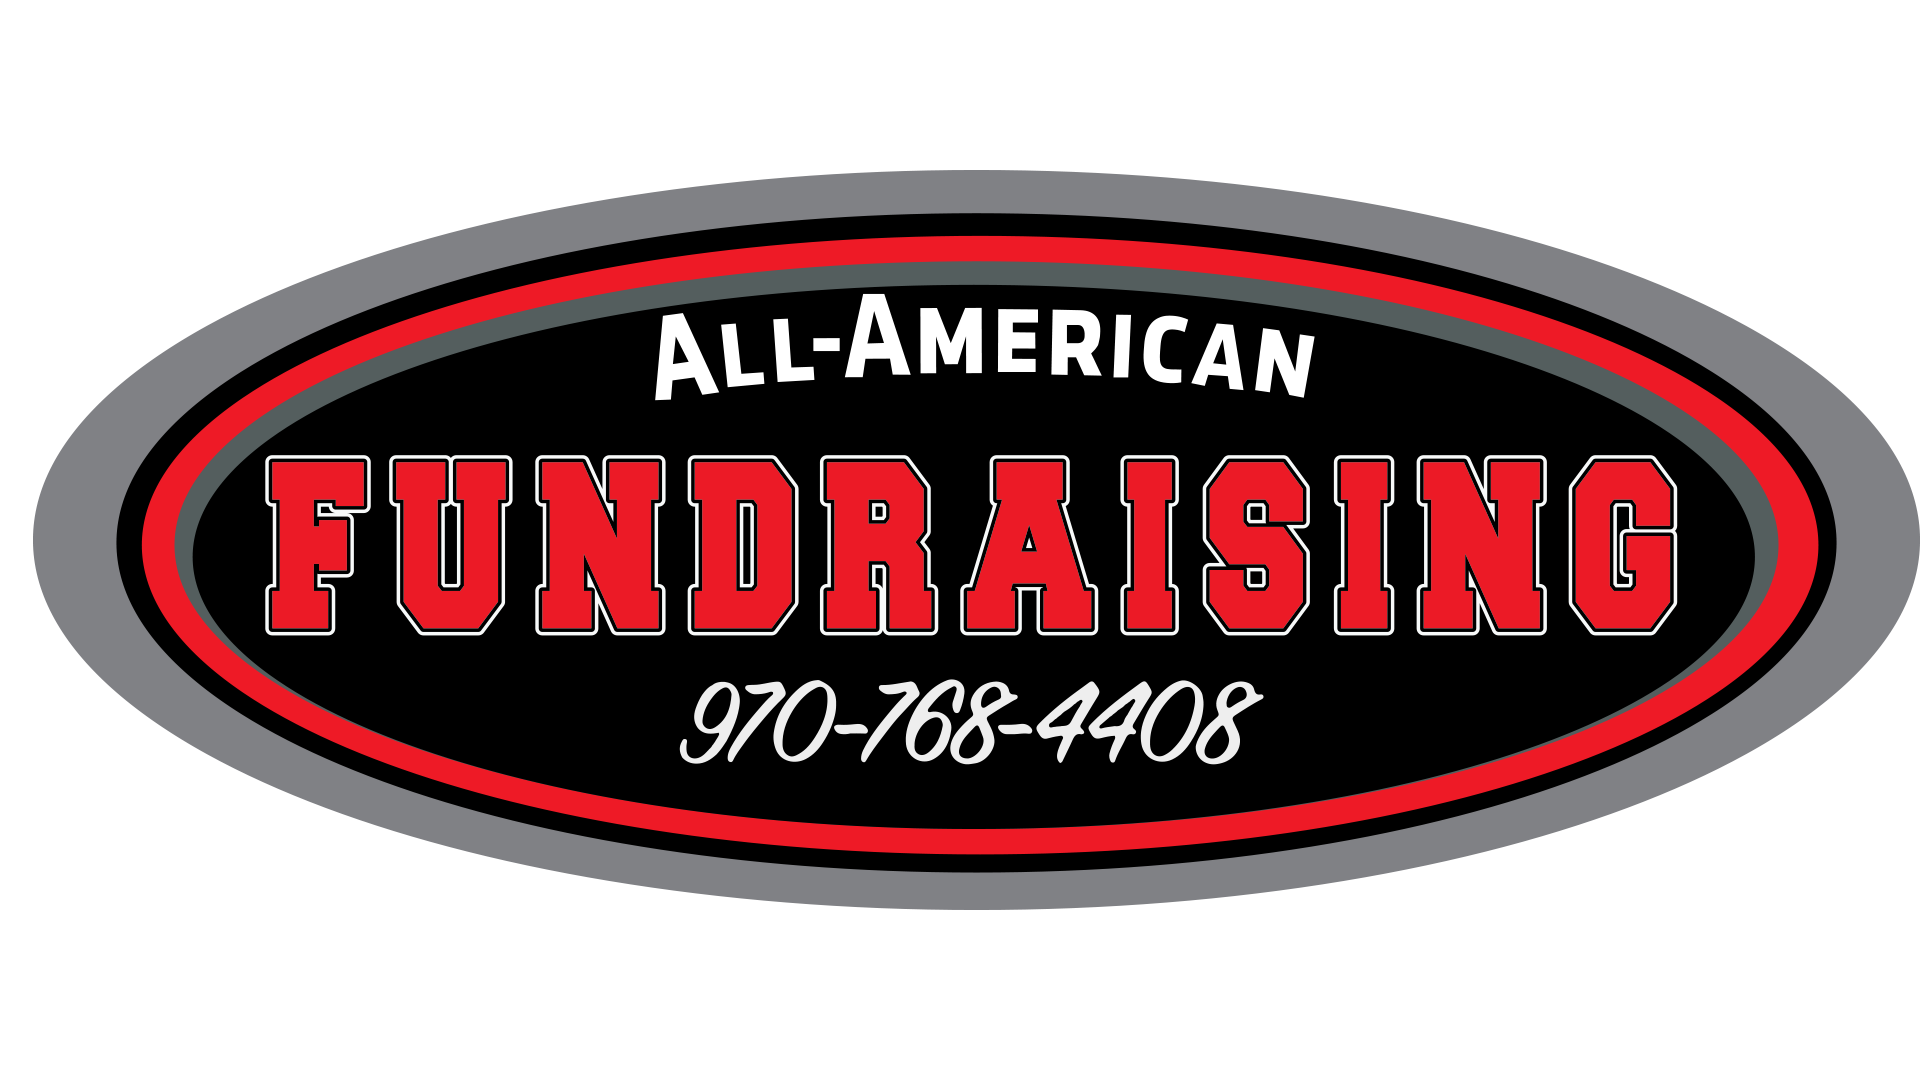 All American Consulting and Fundraising